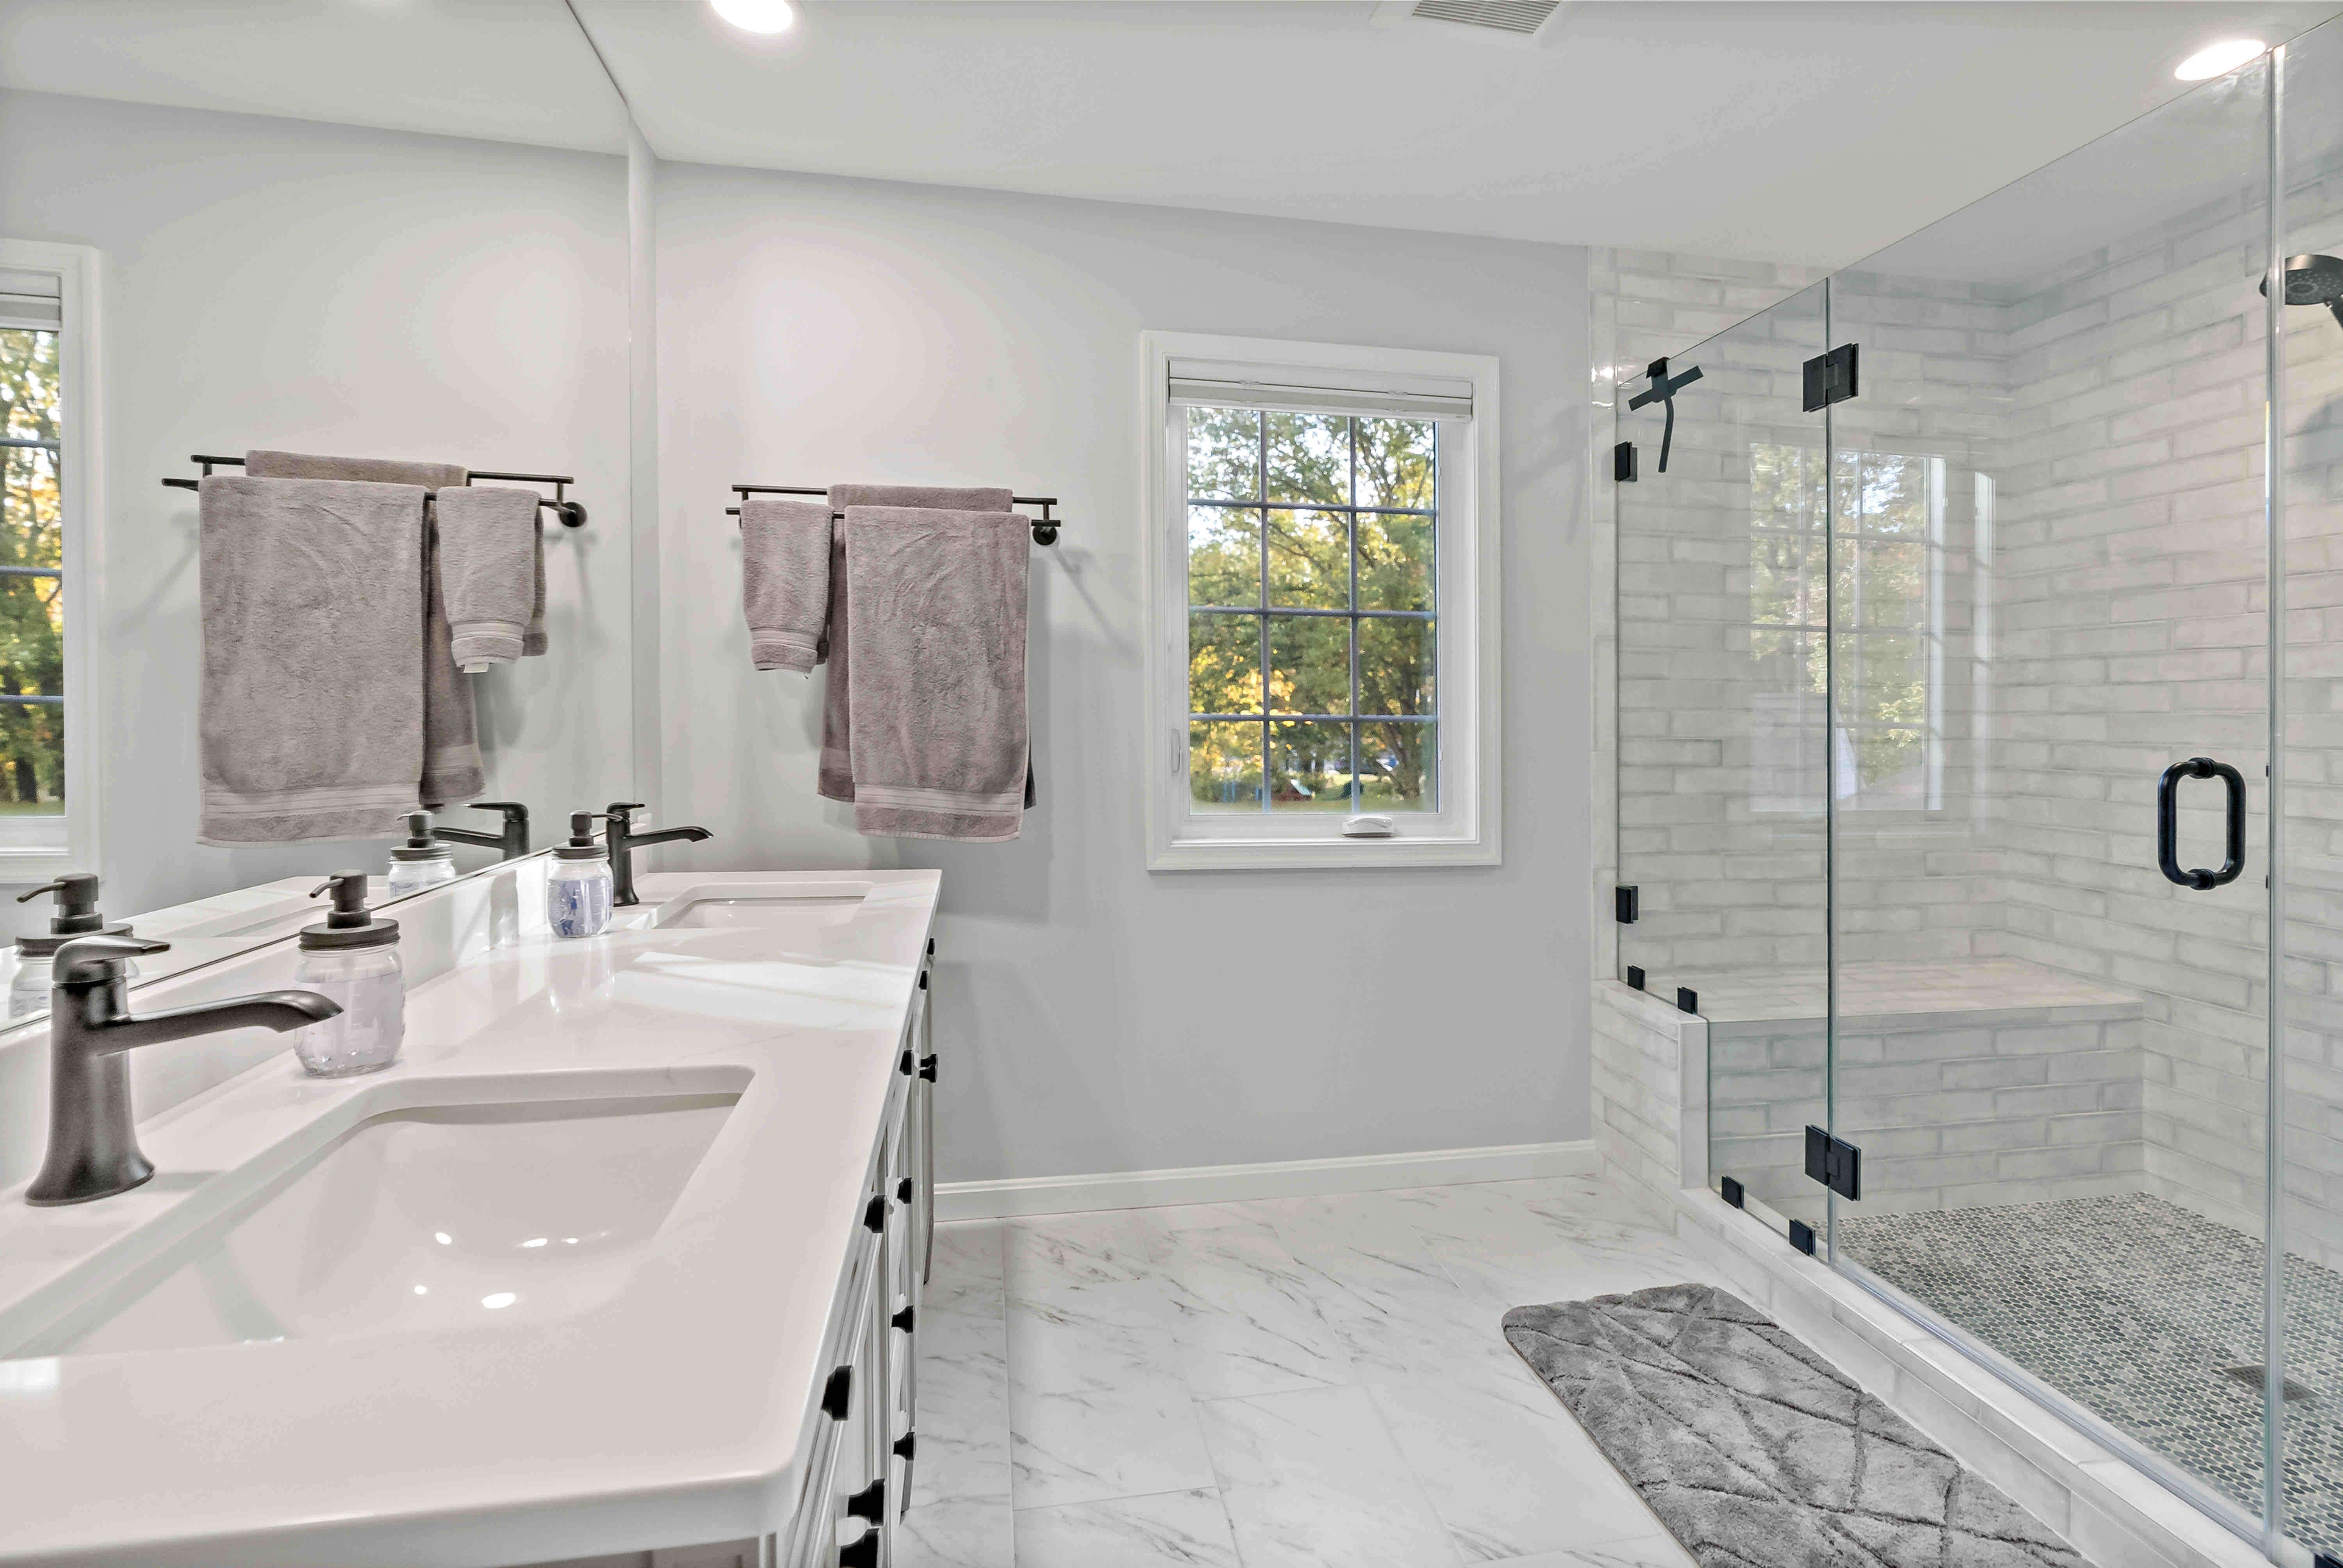 Large full bathroom with glass shower and bench